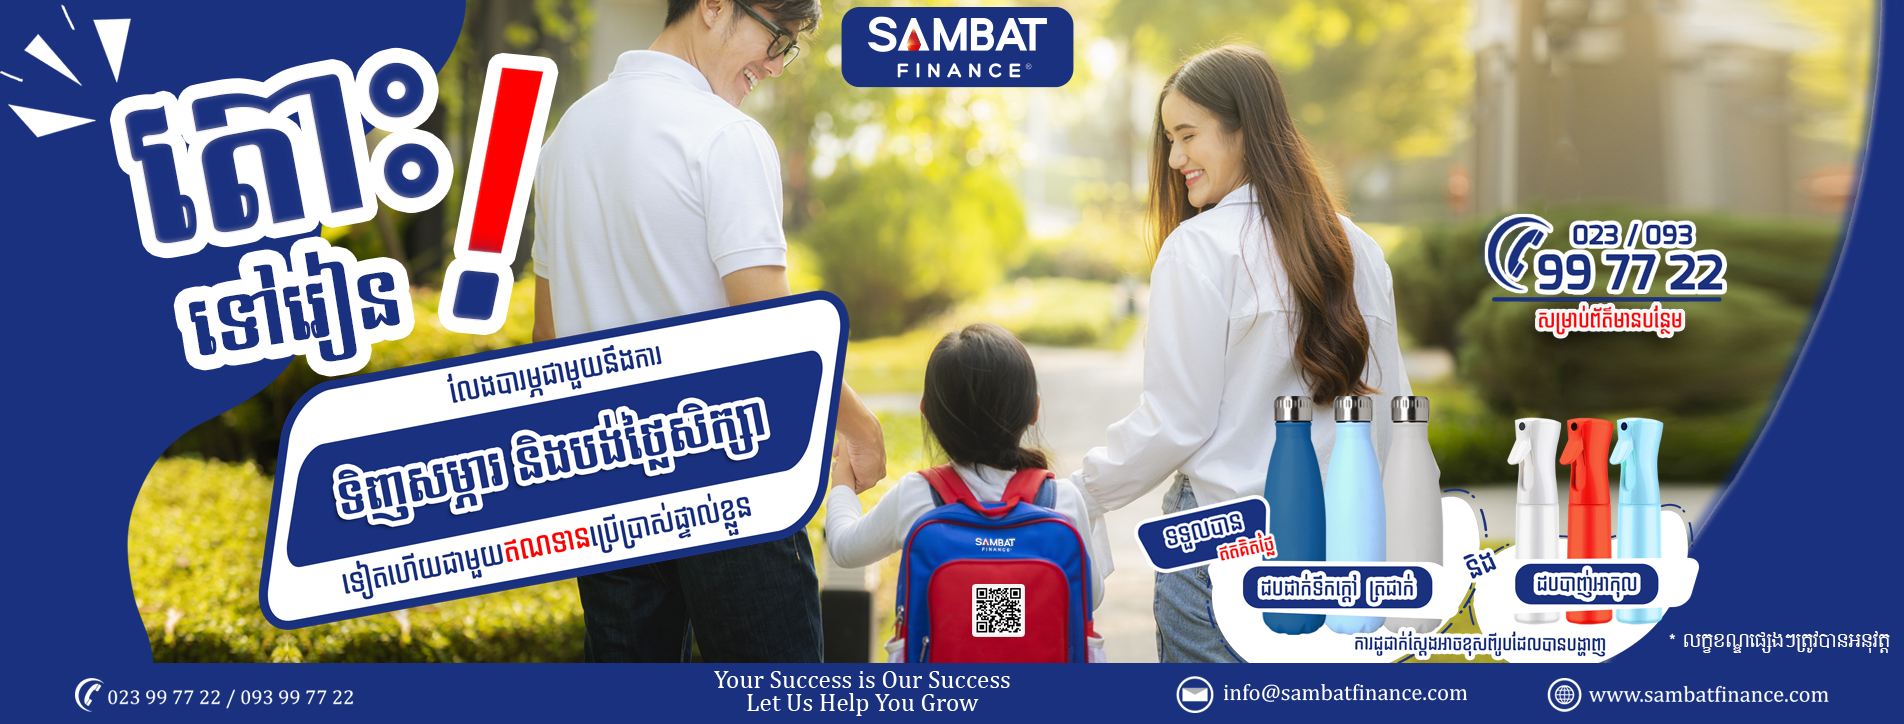 Latest Promotion Safely Back To School Campaign